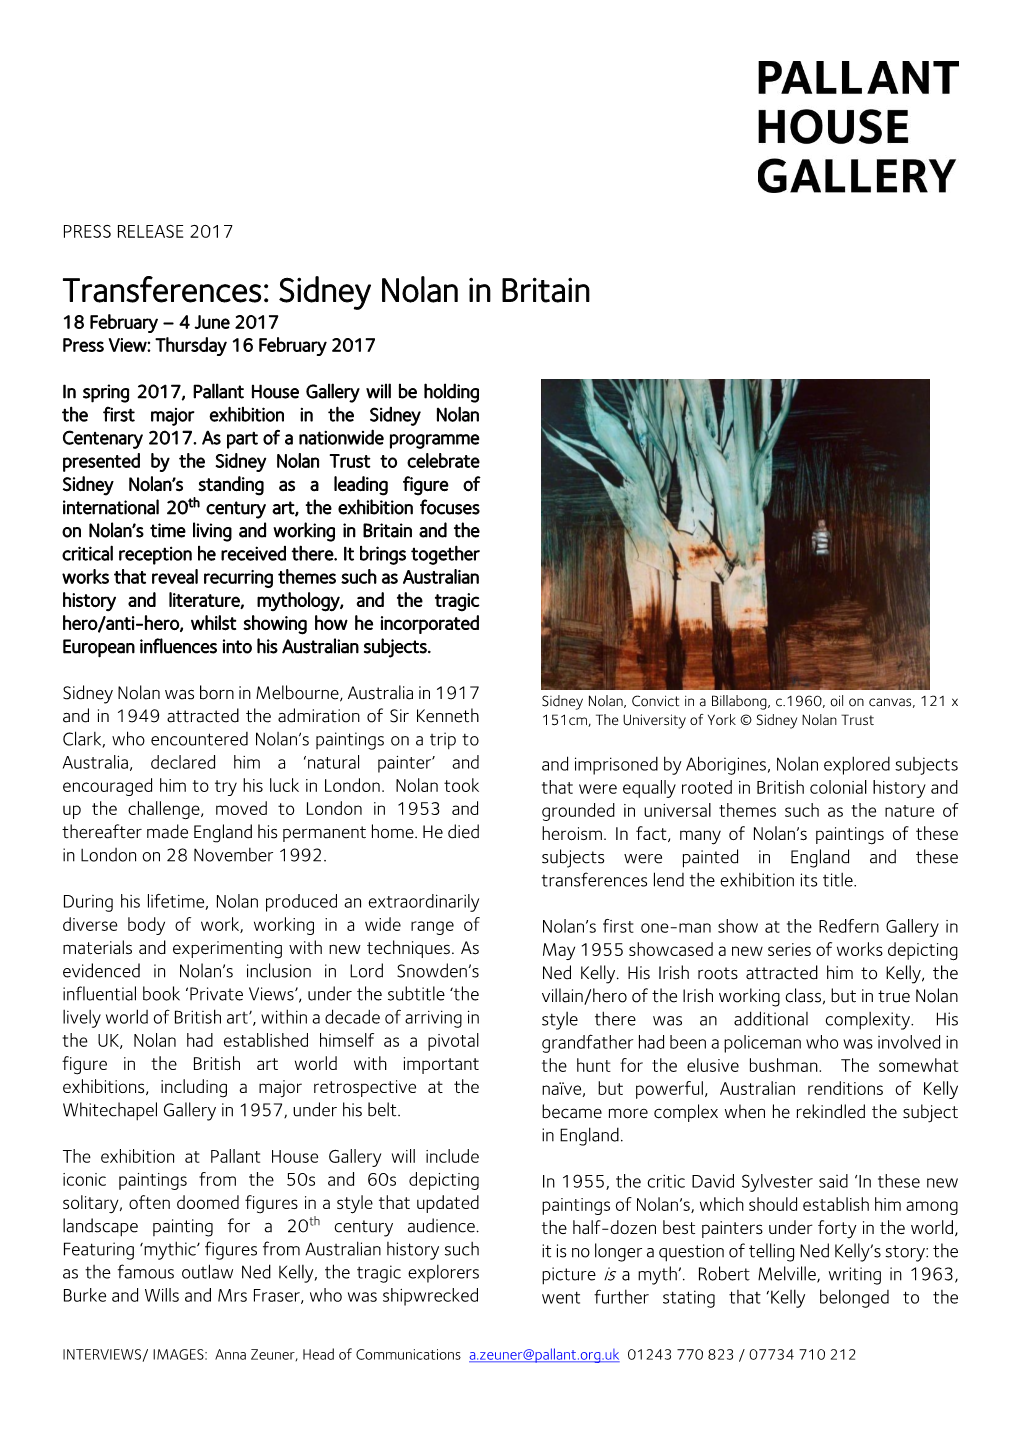 Transferences: Sidney Nolan in Britain 18 February – 4 June 2017 Press View: Thursday 16 February 2017